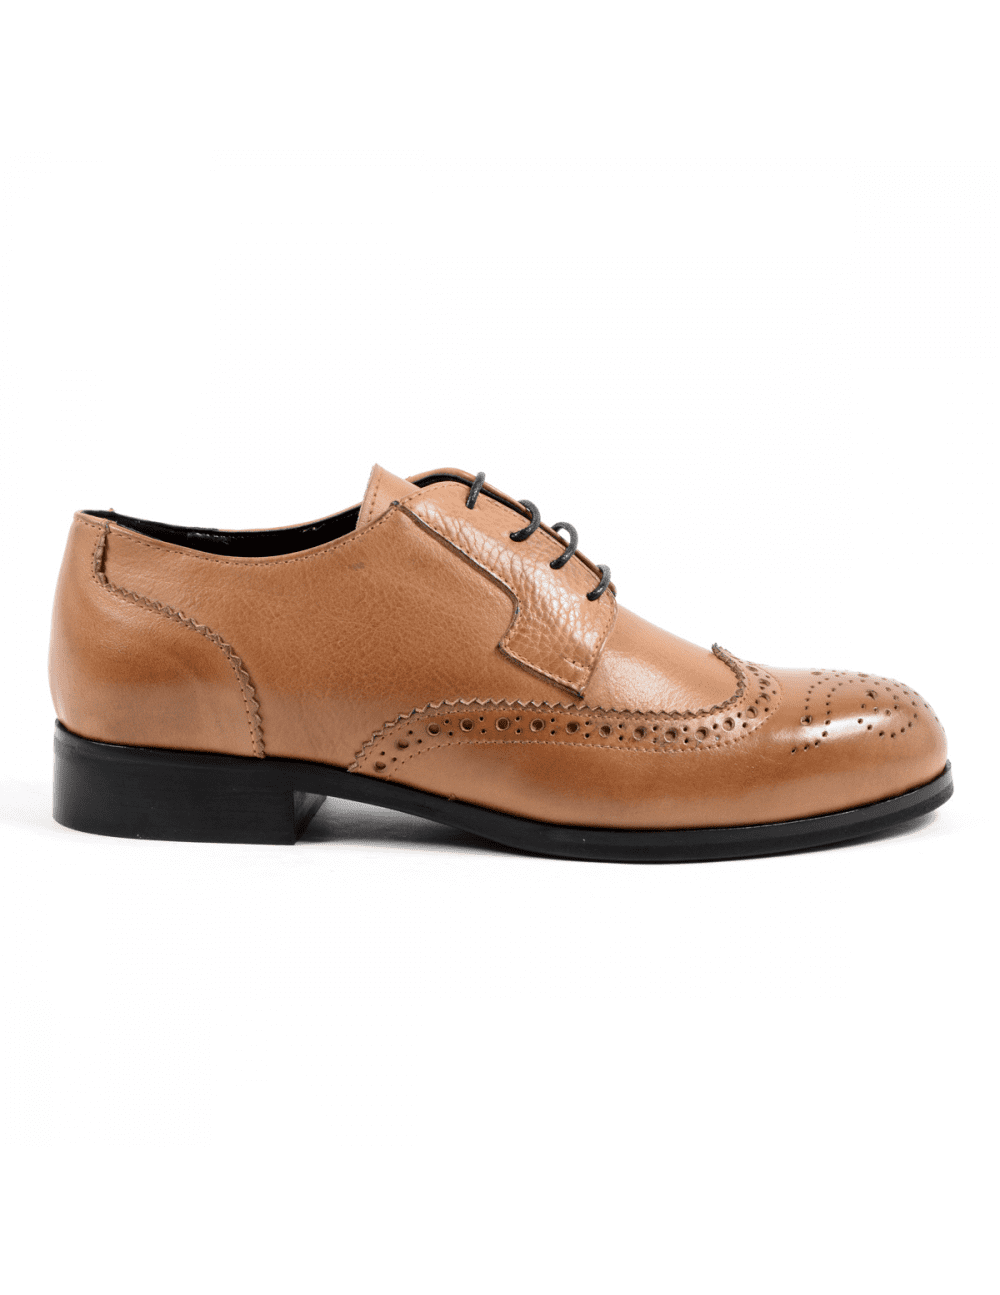 V 1969 Italia Womens Lace Up Shoe Brown 